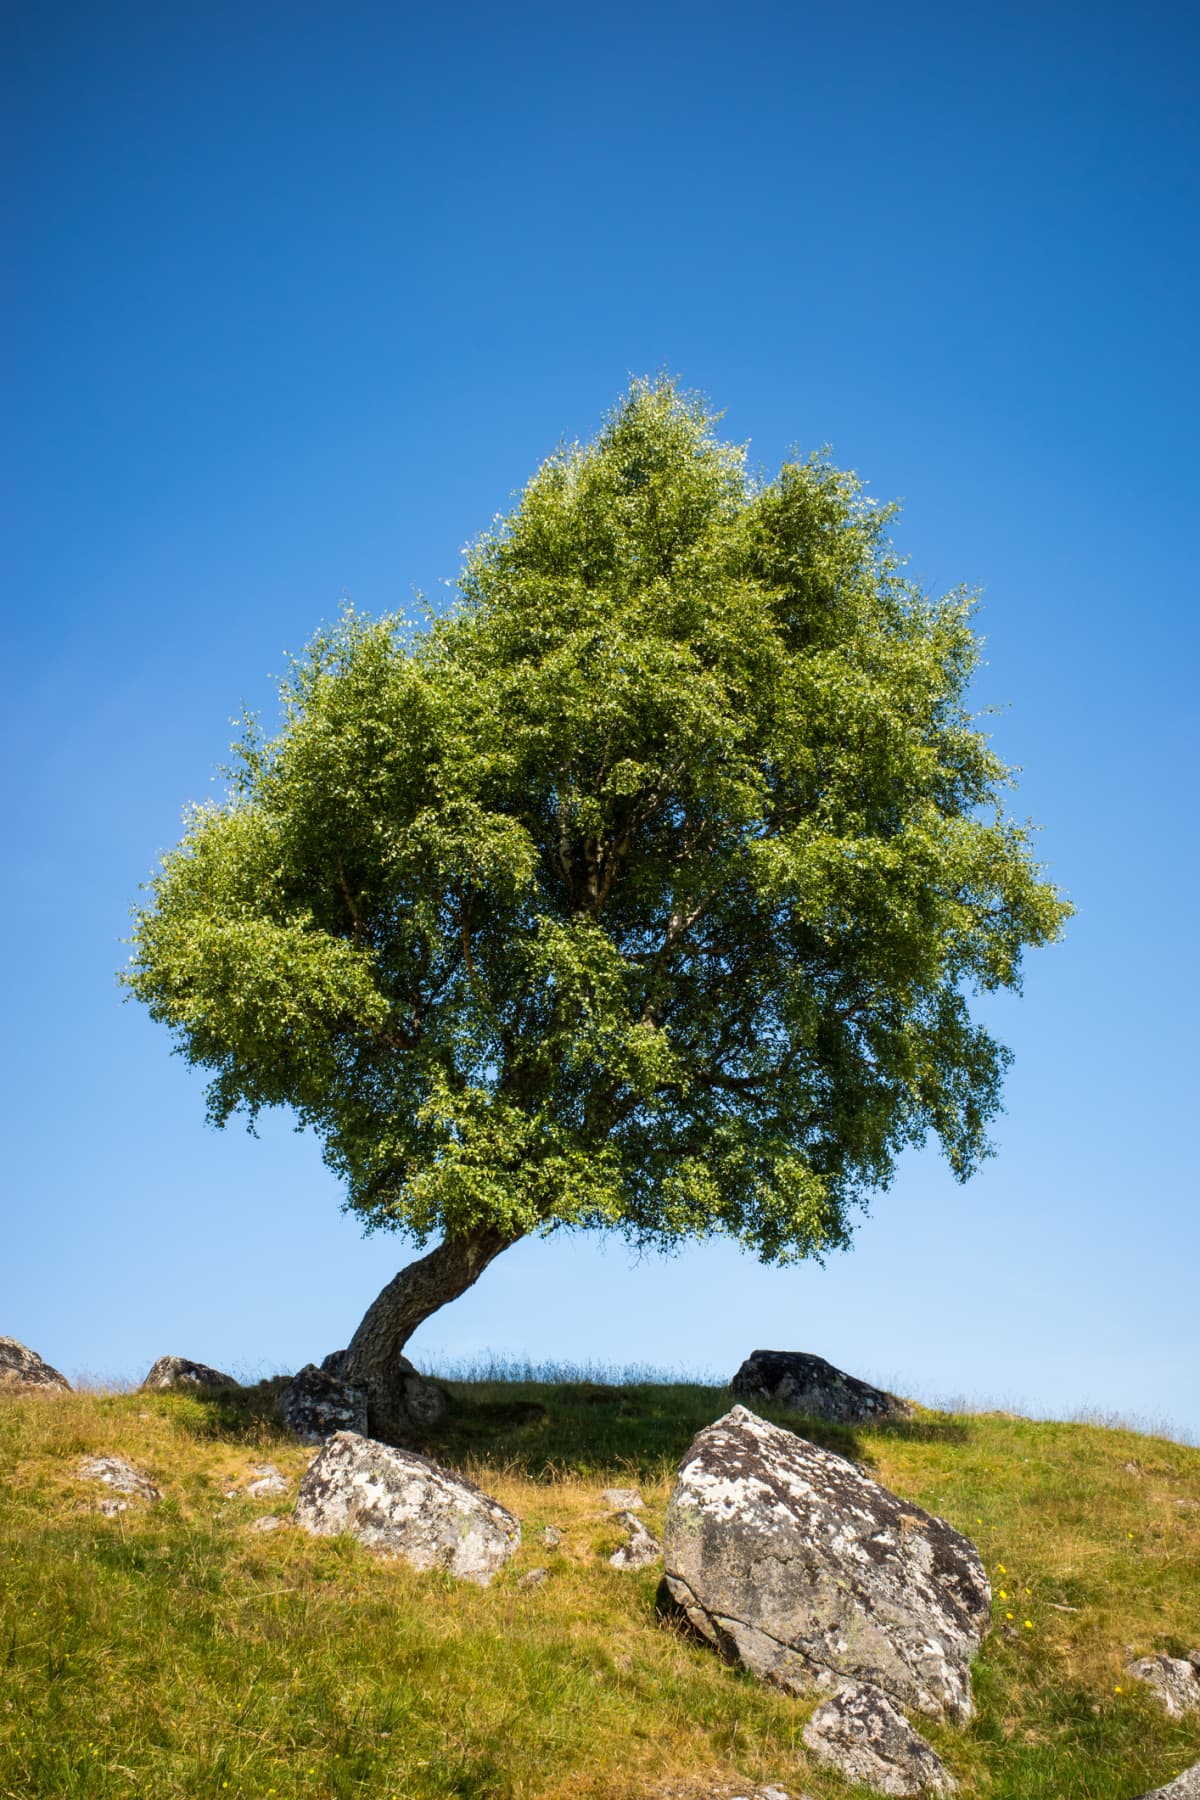 Single leaning tree and rock with clear blue sky